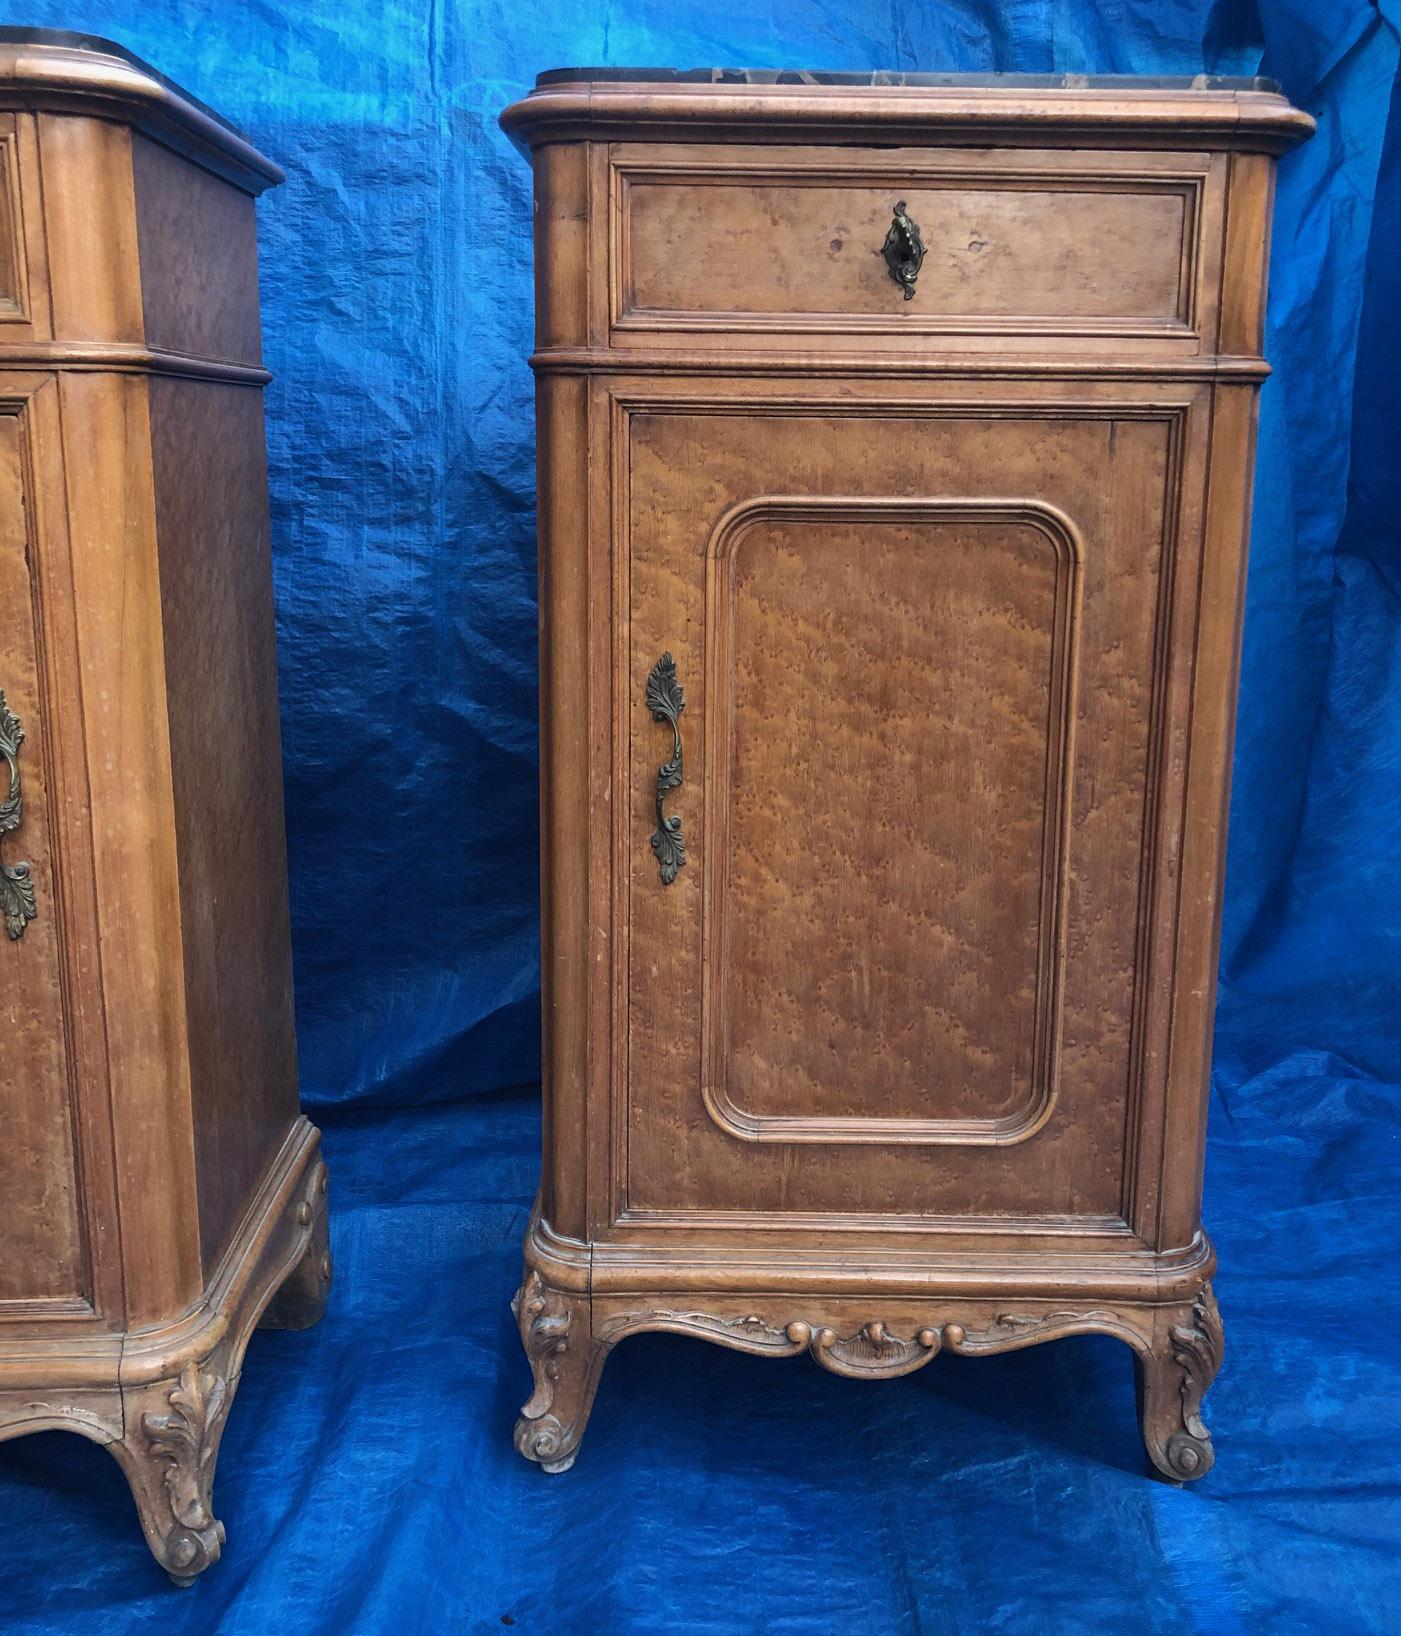 Original antique nightstands in maple, with marble, right and left pair.
Size cm.: 38 x 53 x 97 H.
Given the weight and size, it will be delivered in a specific wooden case for export, packed in bubble wrap.
They  come from an old country house in